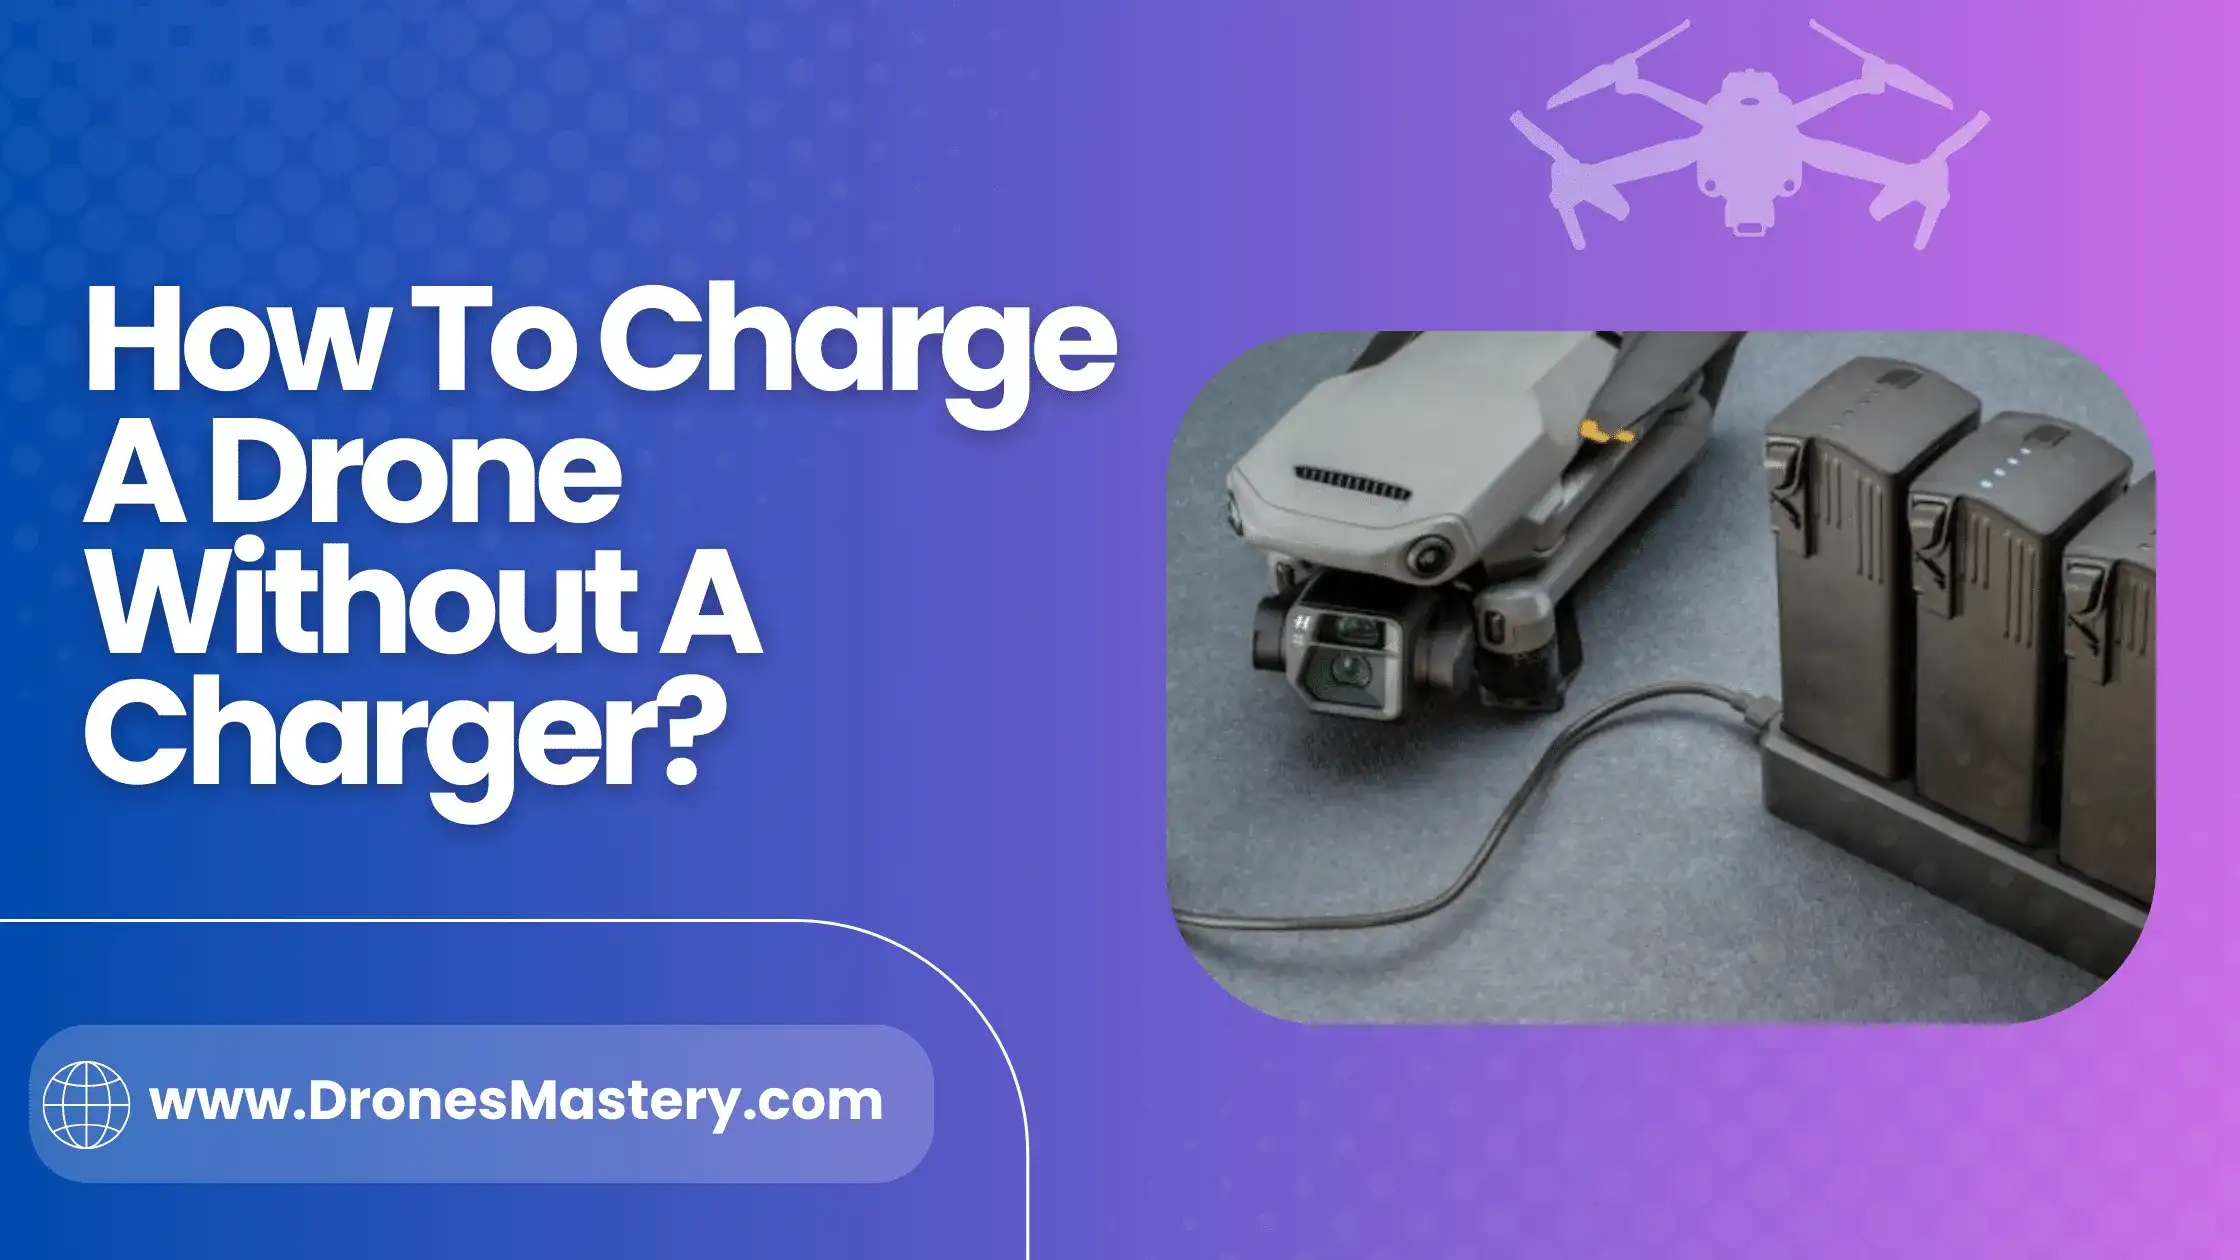 How To Charge A Drone Without A Charger? Simple Guide